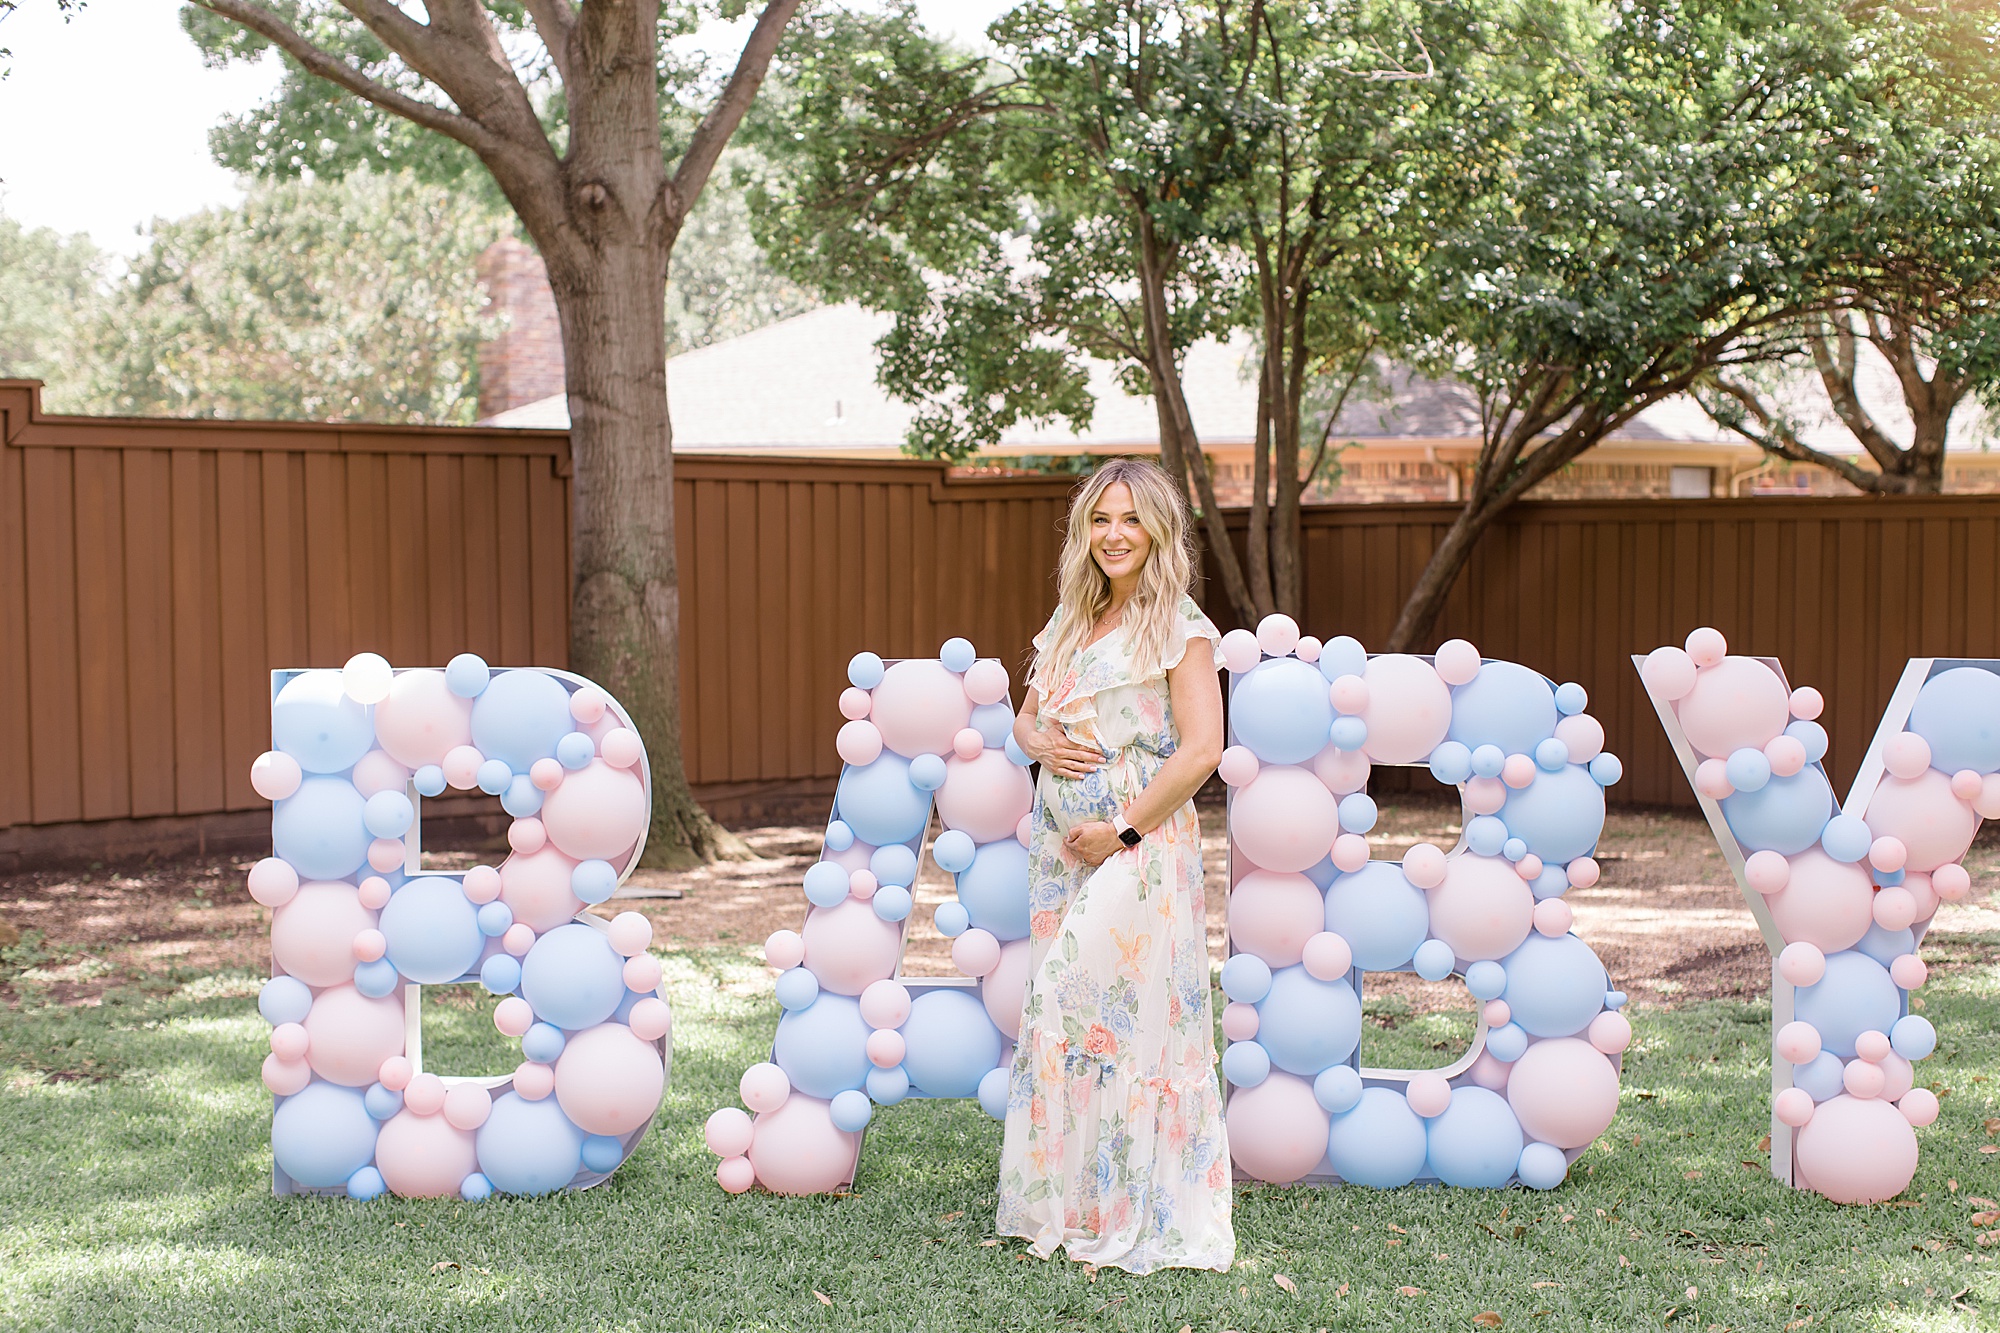 mom poses by BABY sign in backyard